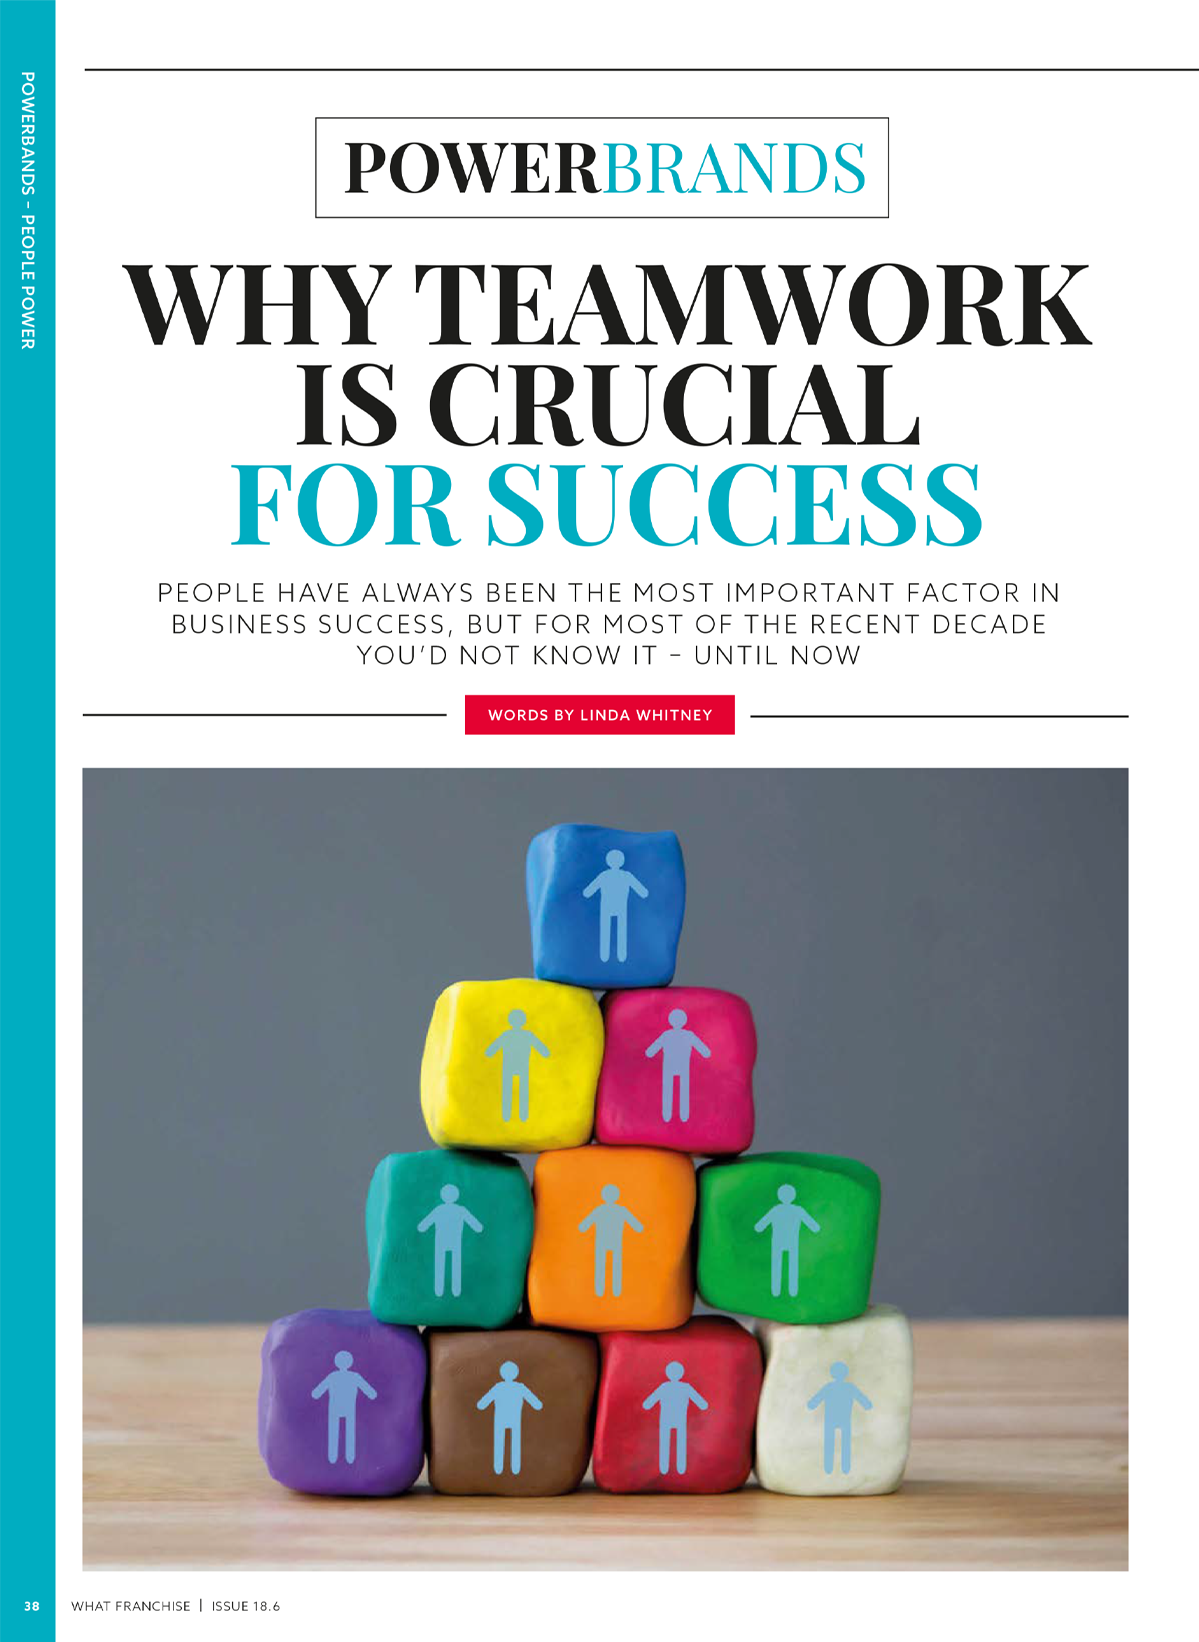 Power Brands:  Why teamwork is crucial for success